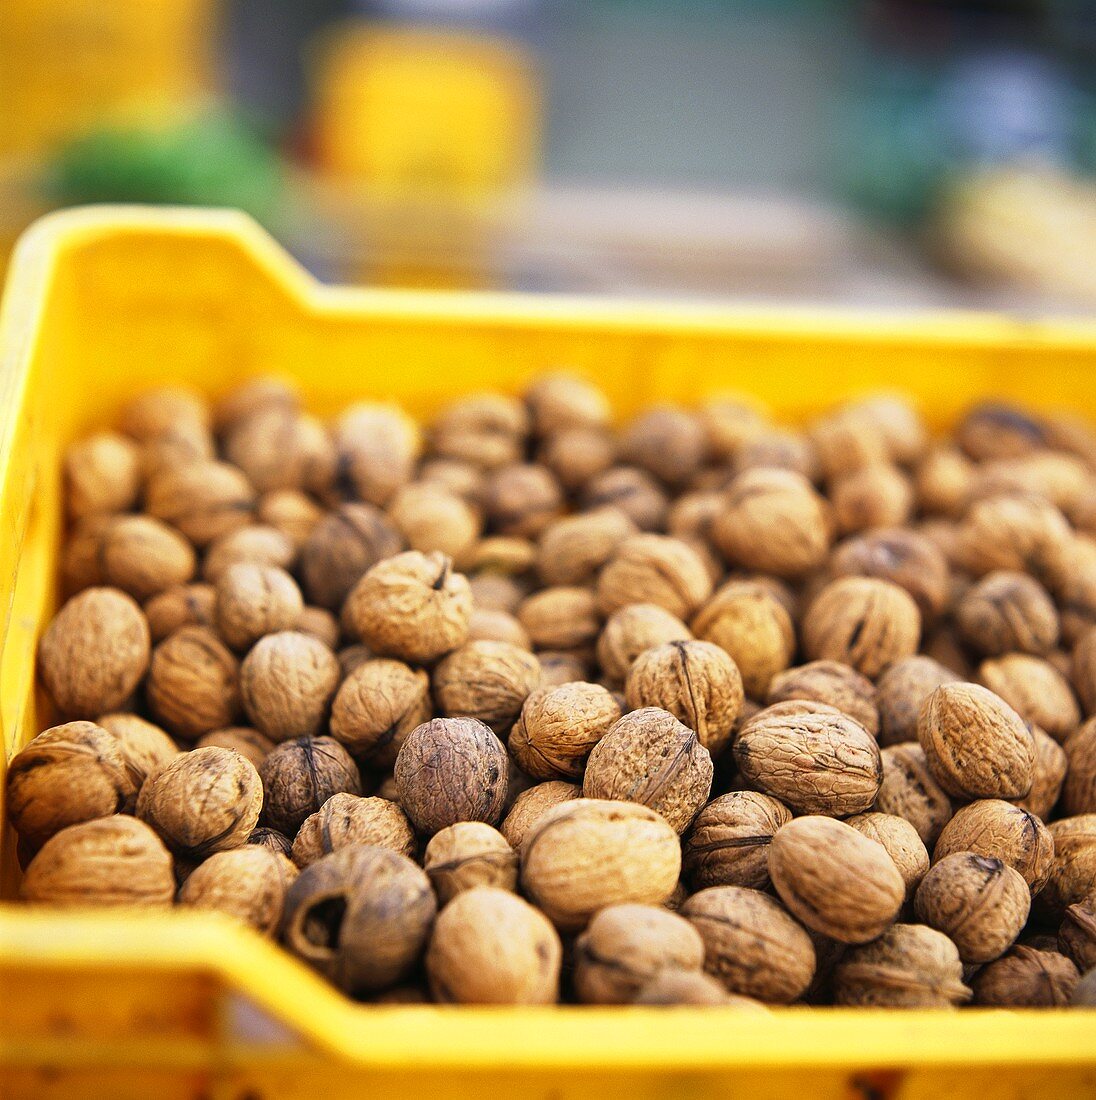 Many walnuts in crate at the market